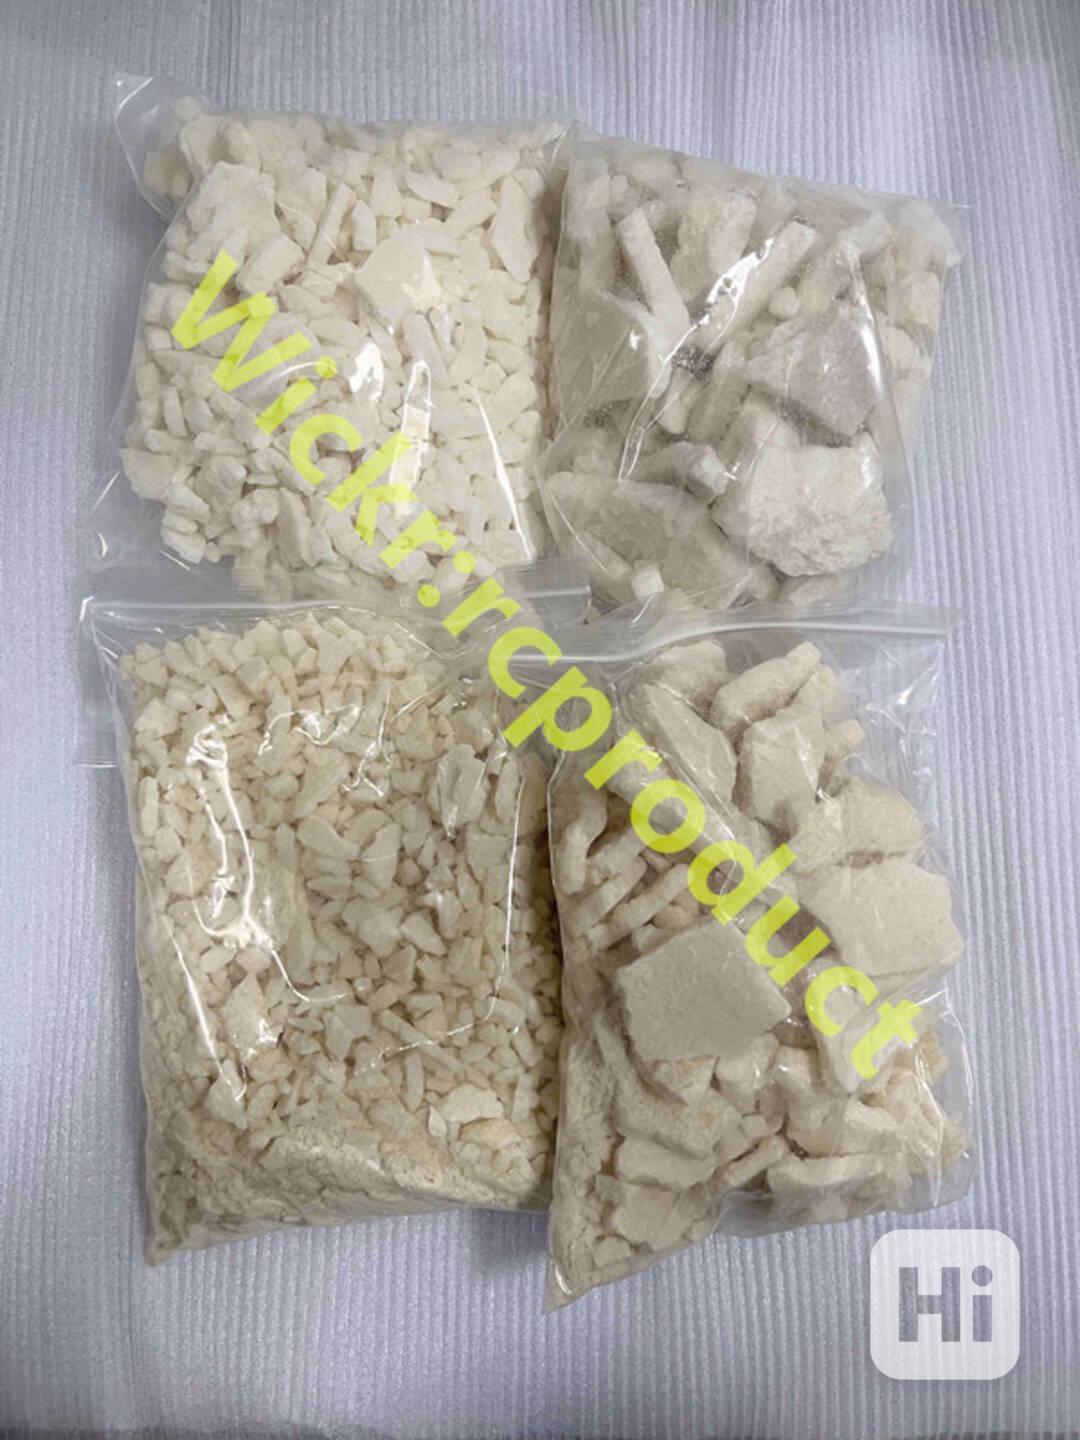 Researchchemical powder and crystal,wickr:rcproduct - foto 1